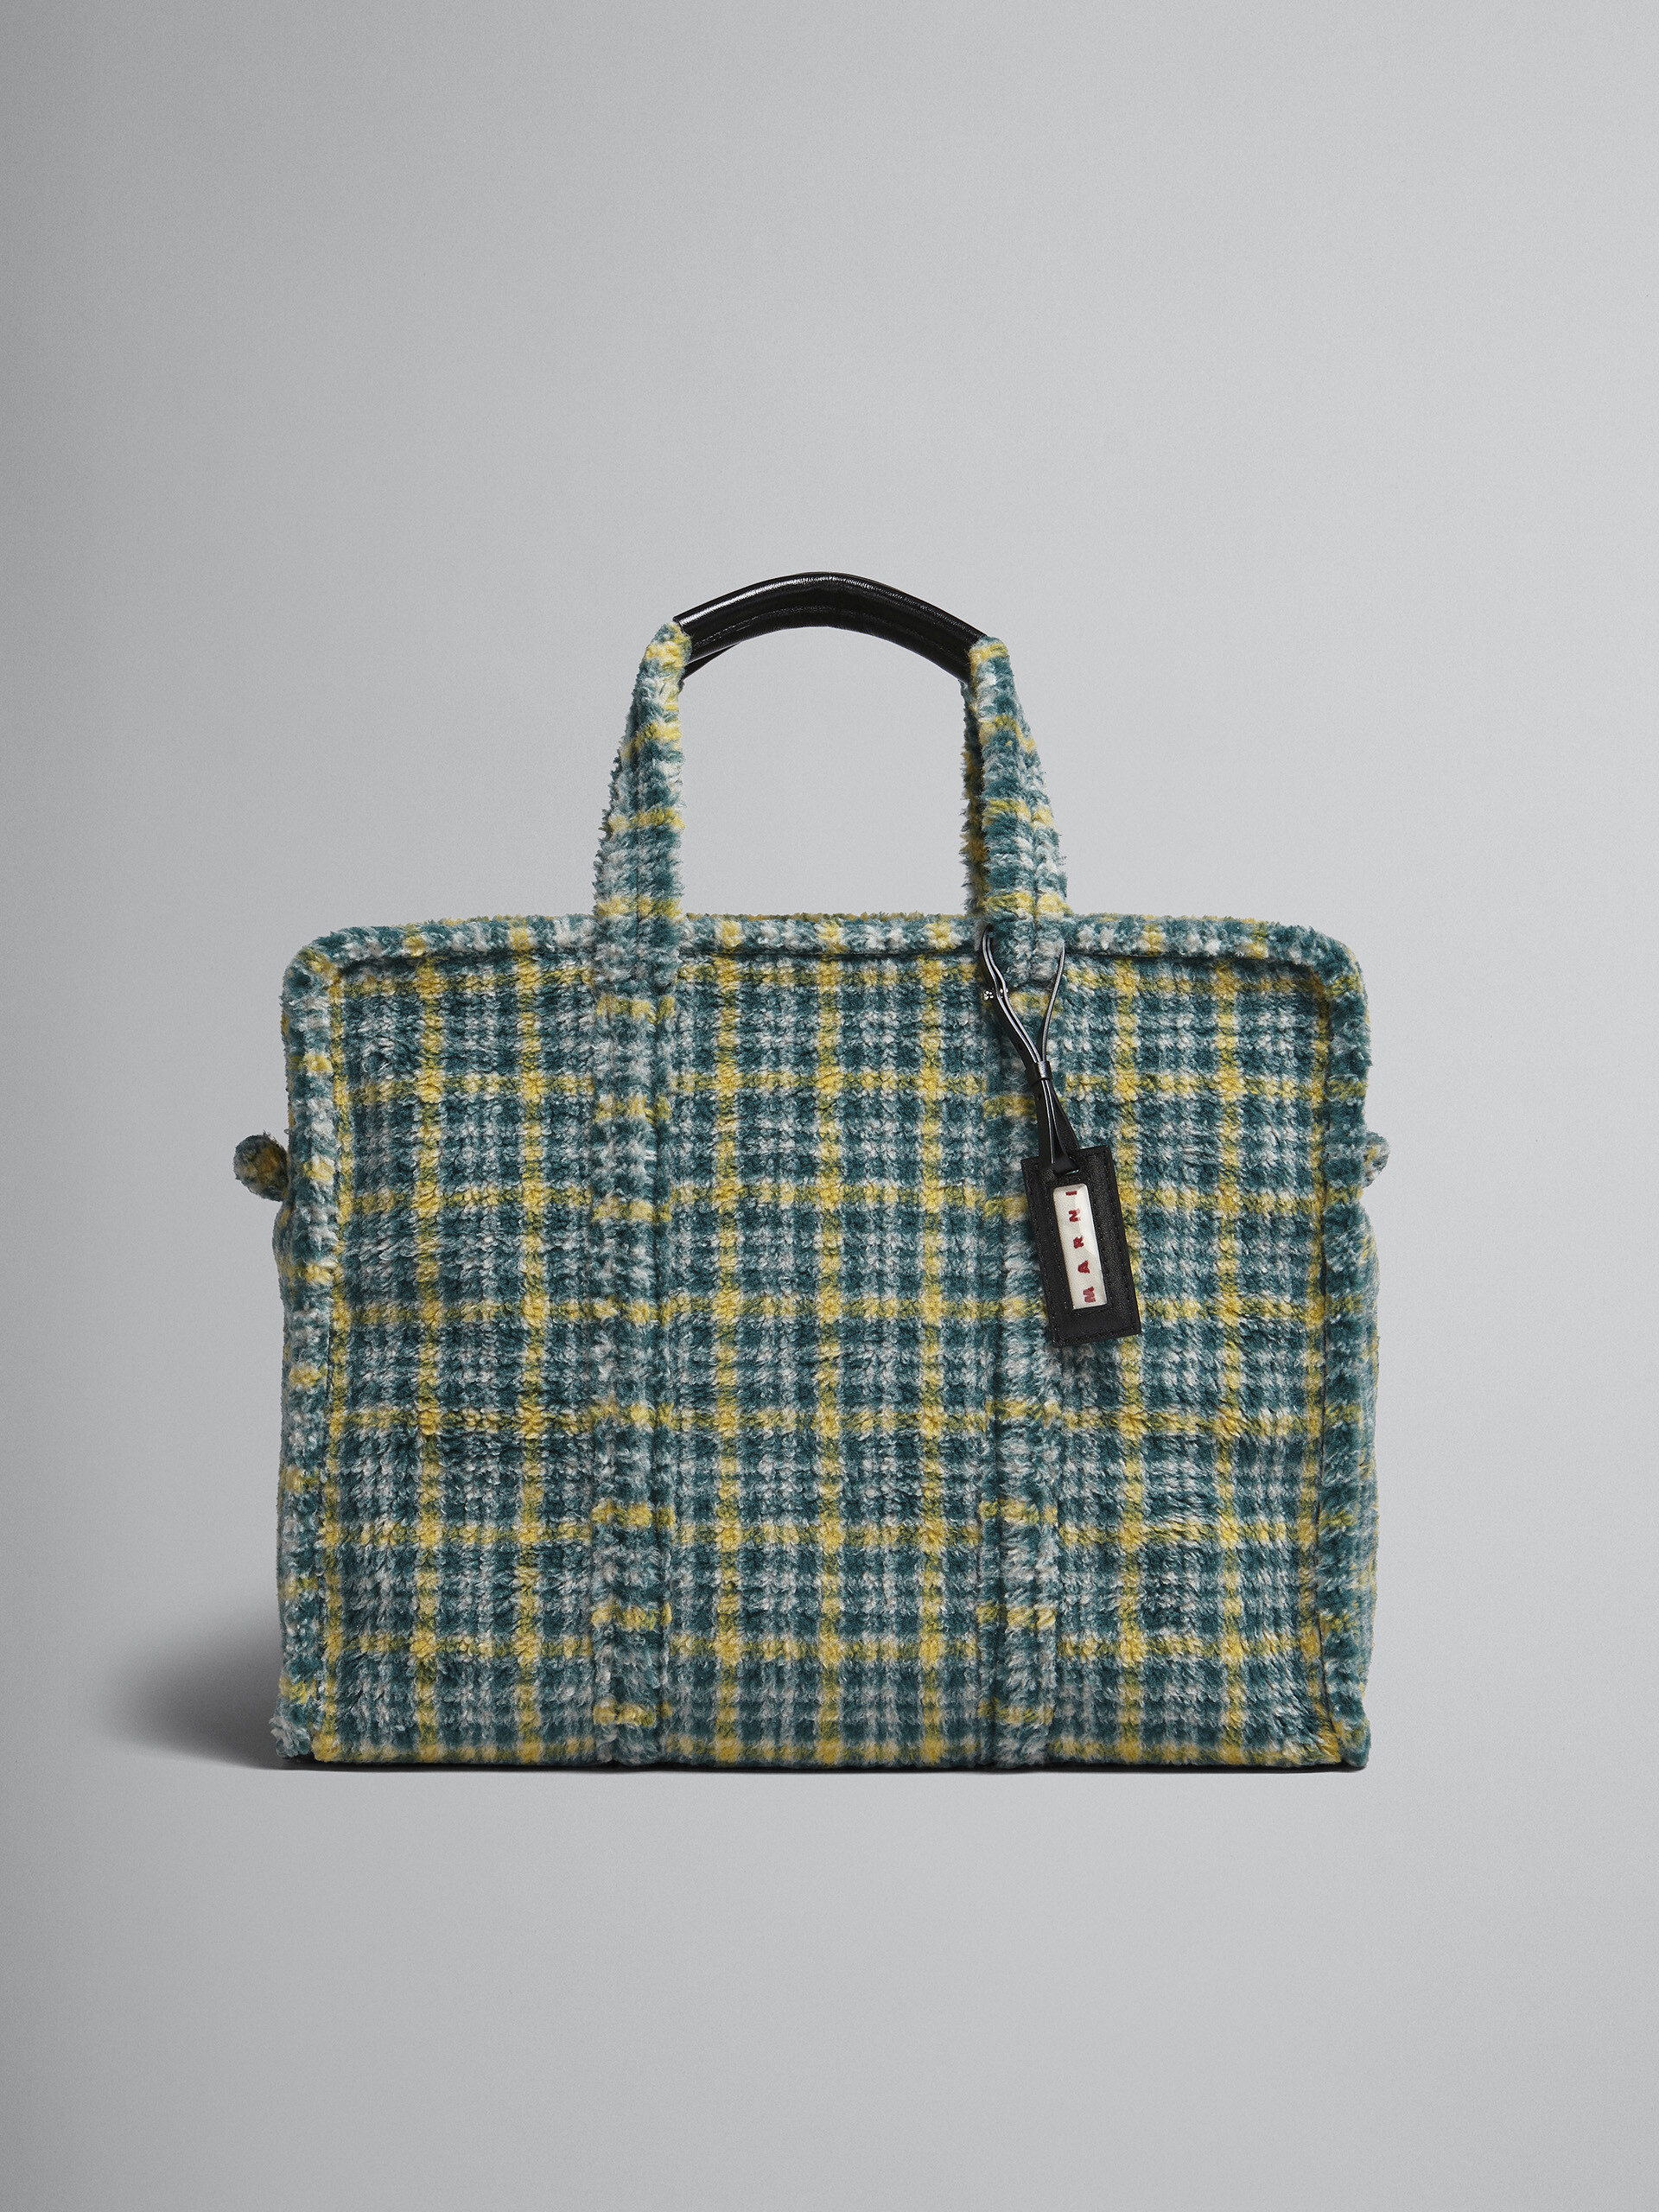 Travel bag in green check fabric - Shopping Bags - Image 1